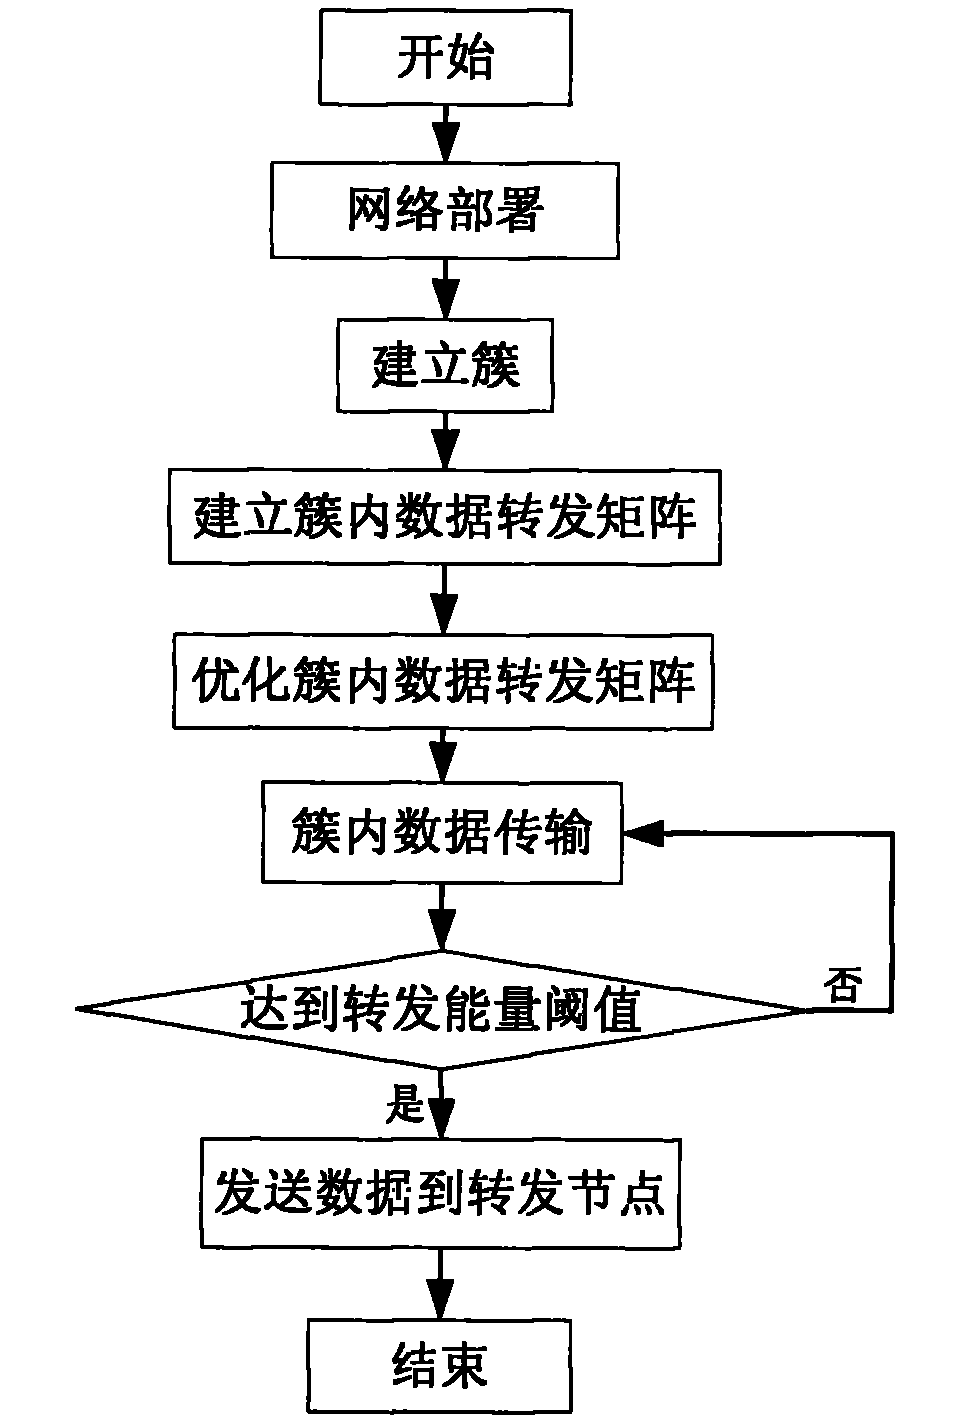 Network clustering method of wireless sensor based on fixed cluster heads